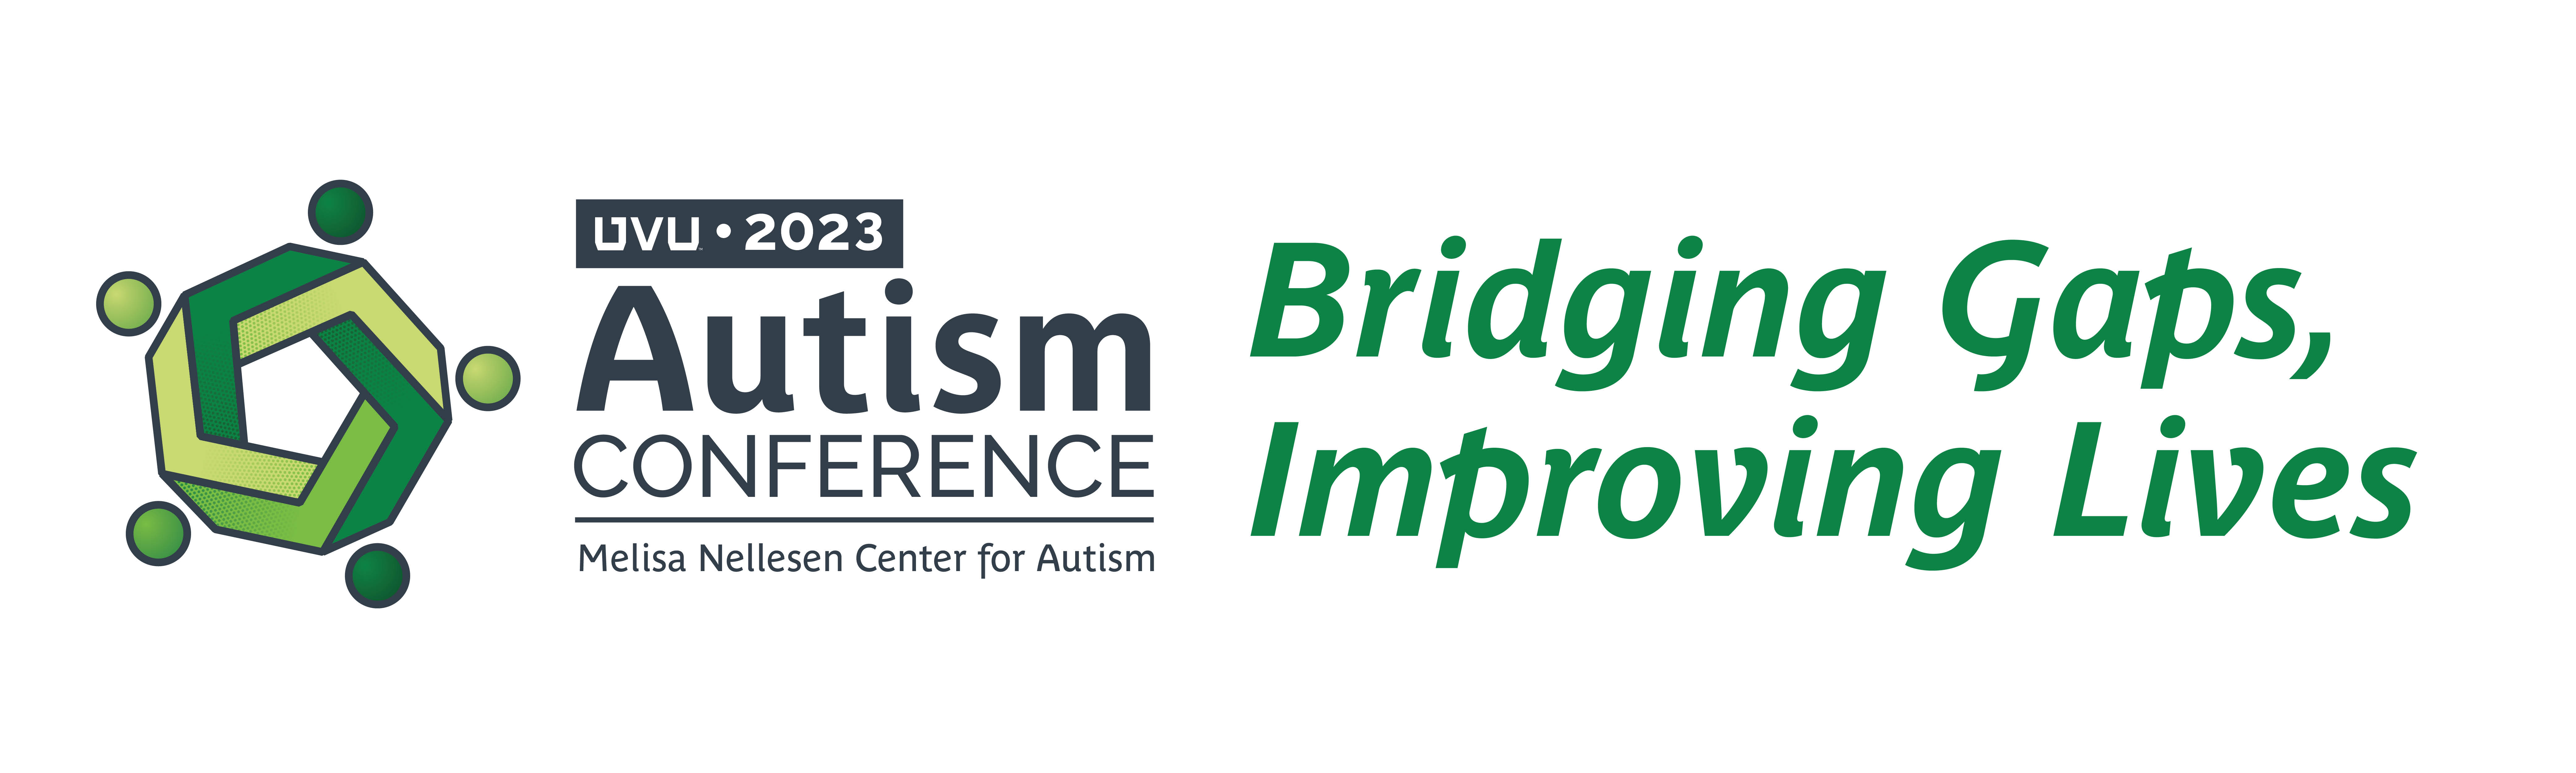 Autism Conference 2022